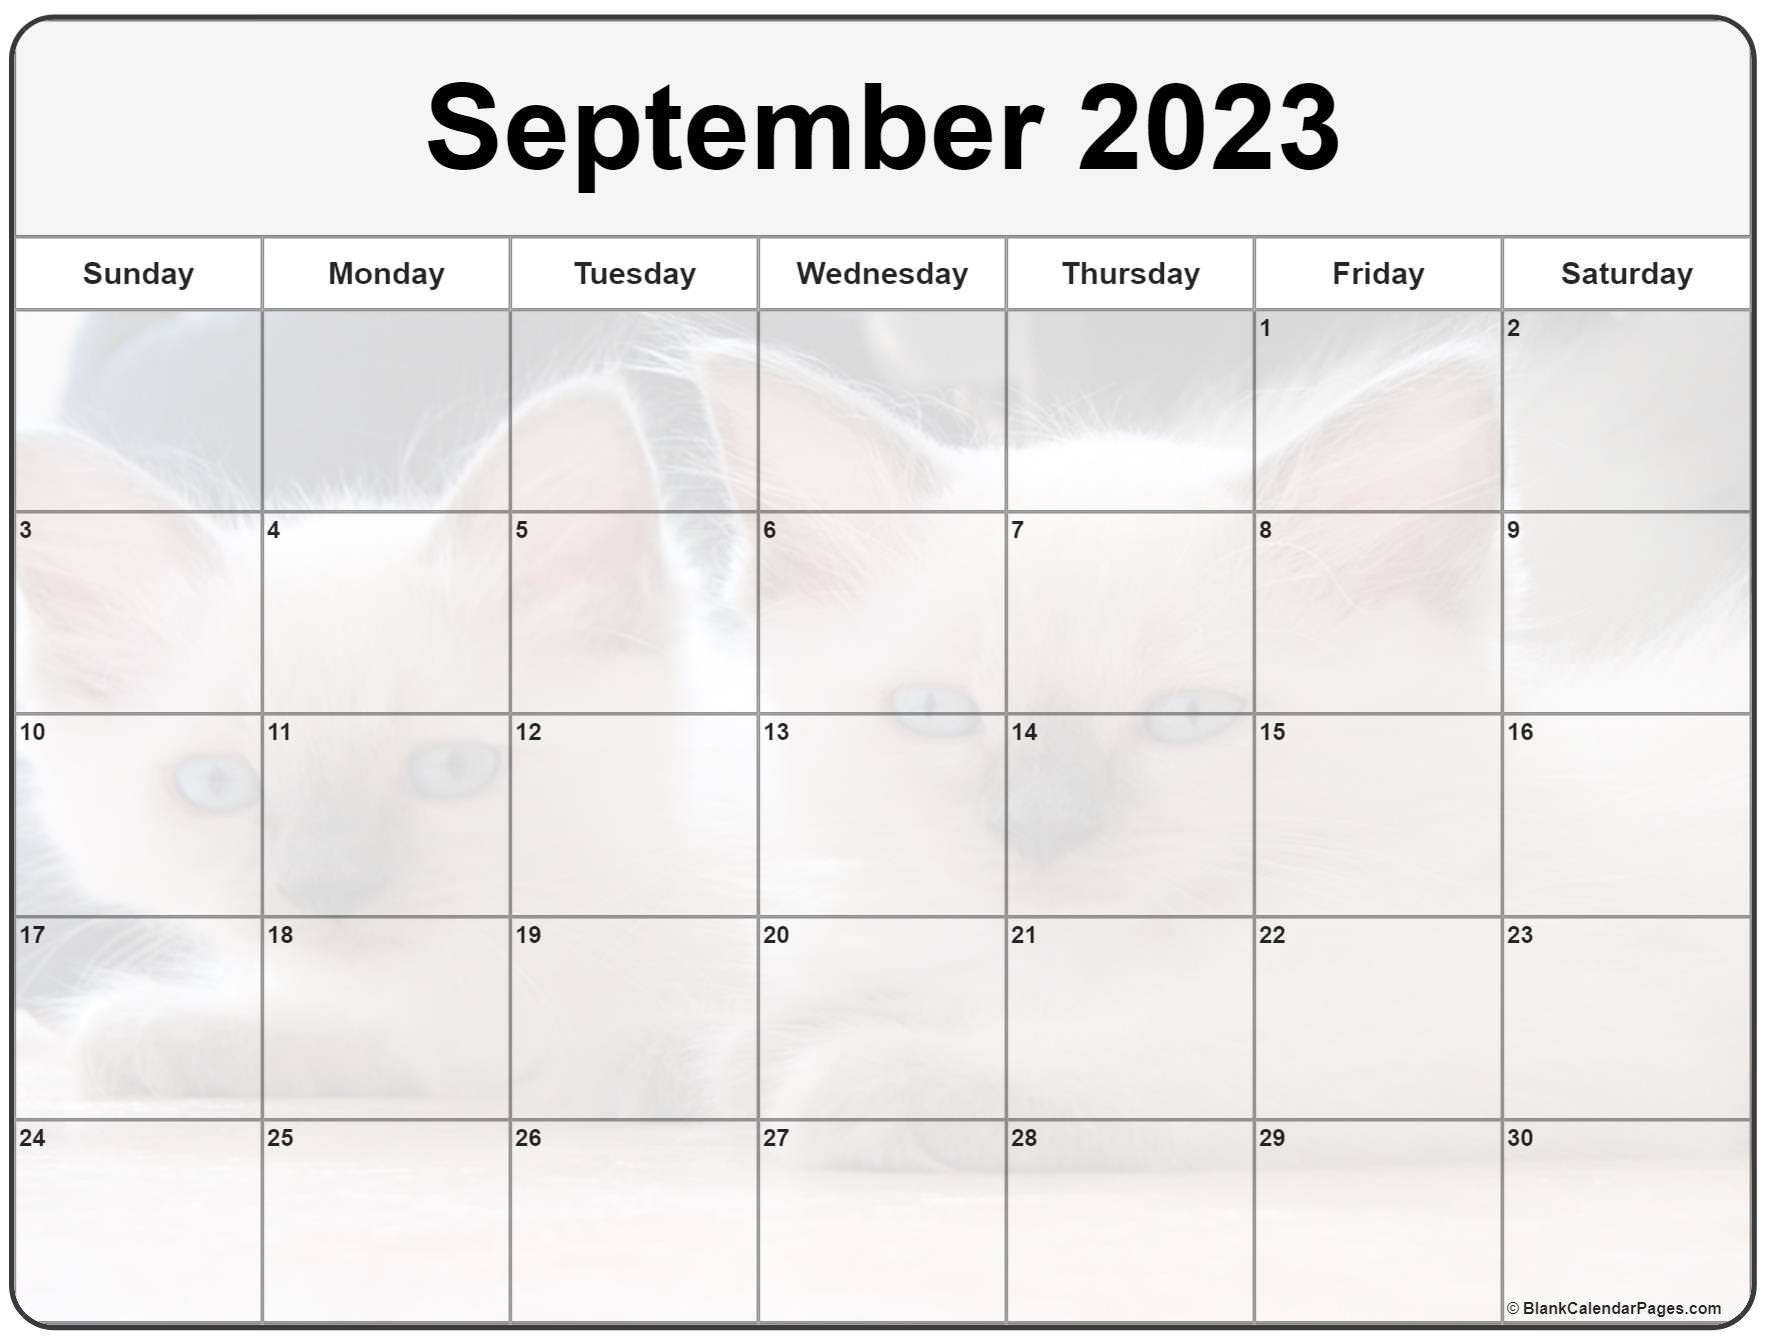 september-2023-calendar-printable-free-2023-cool-latest-review-of-seaside-calendar-of-events-2023